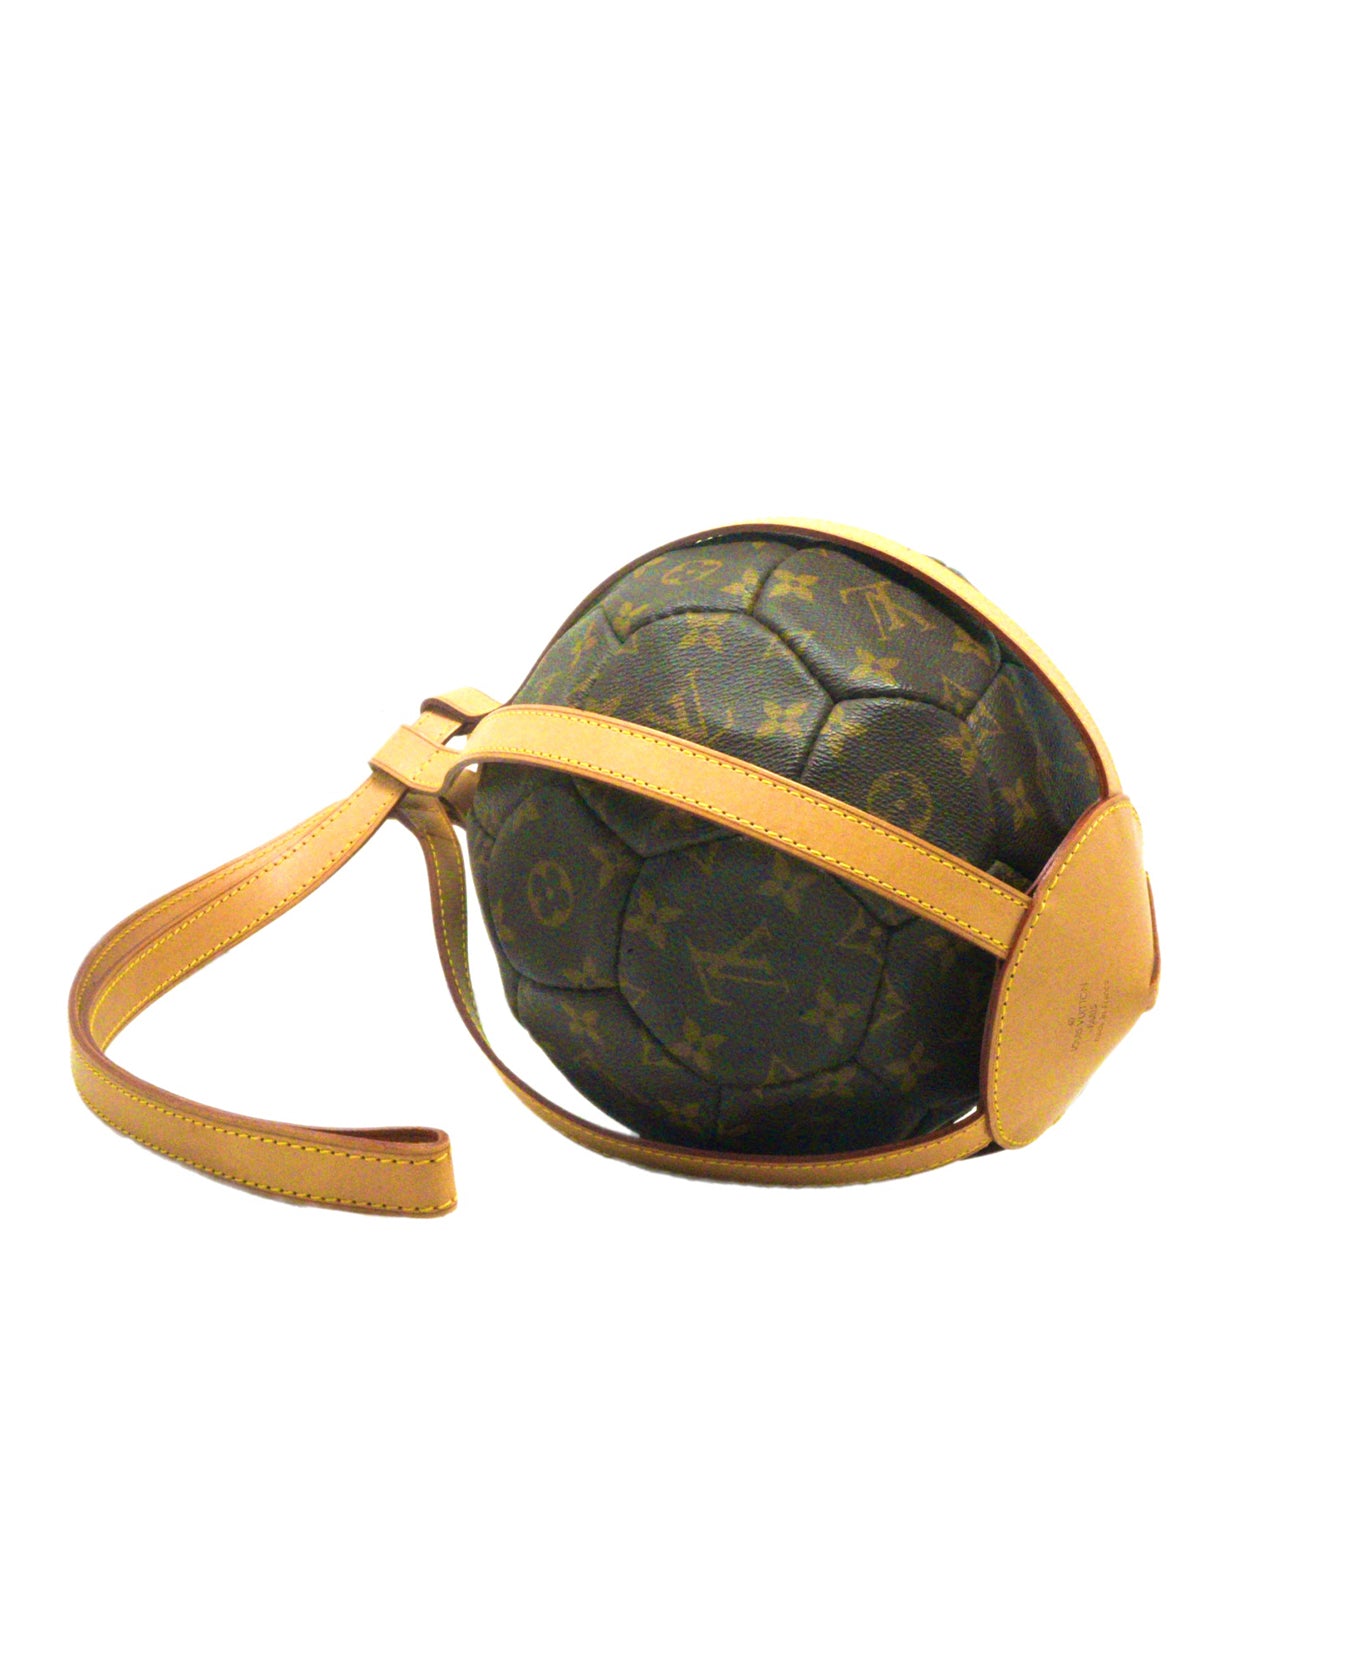 Found by Fred Segal - Women's Louis Vuitton Monogram Soccer Ball Bag | Color: Brown | Size: 7.9